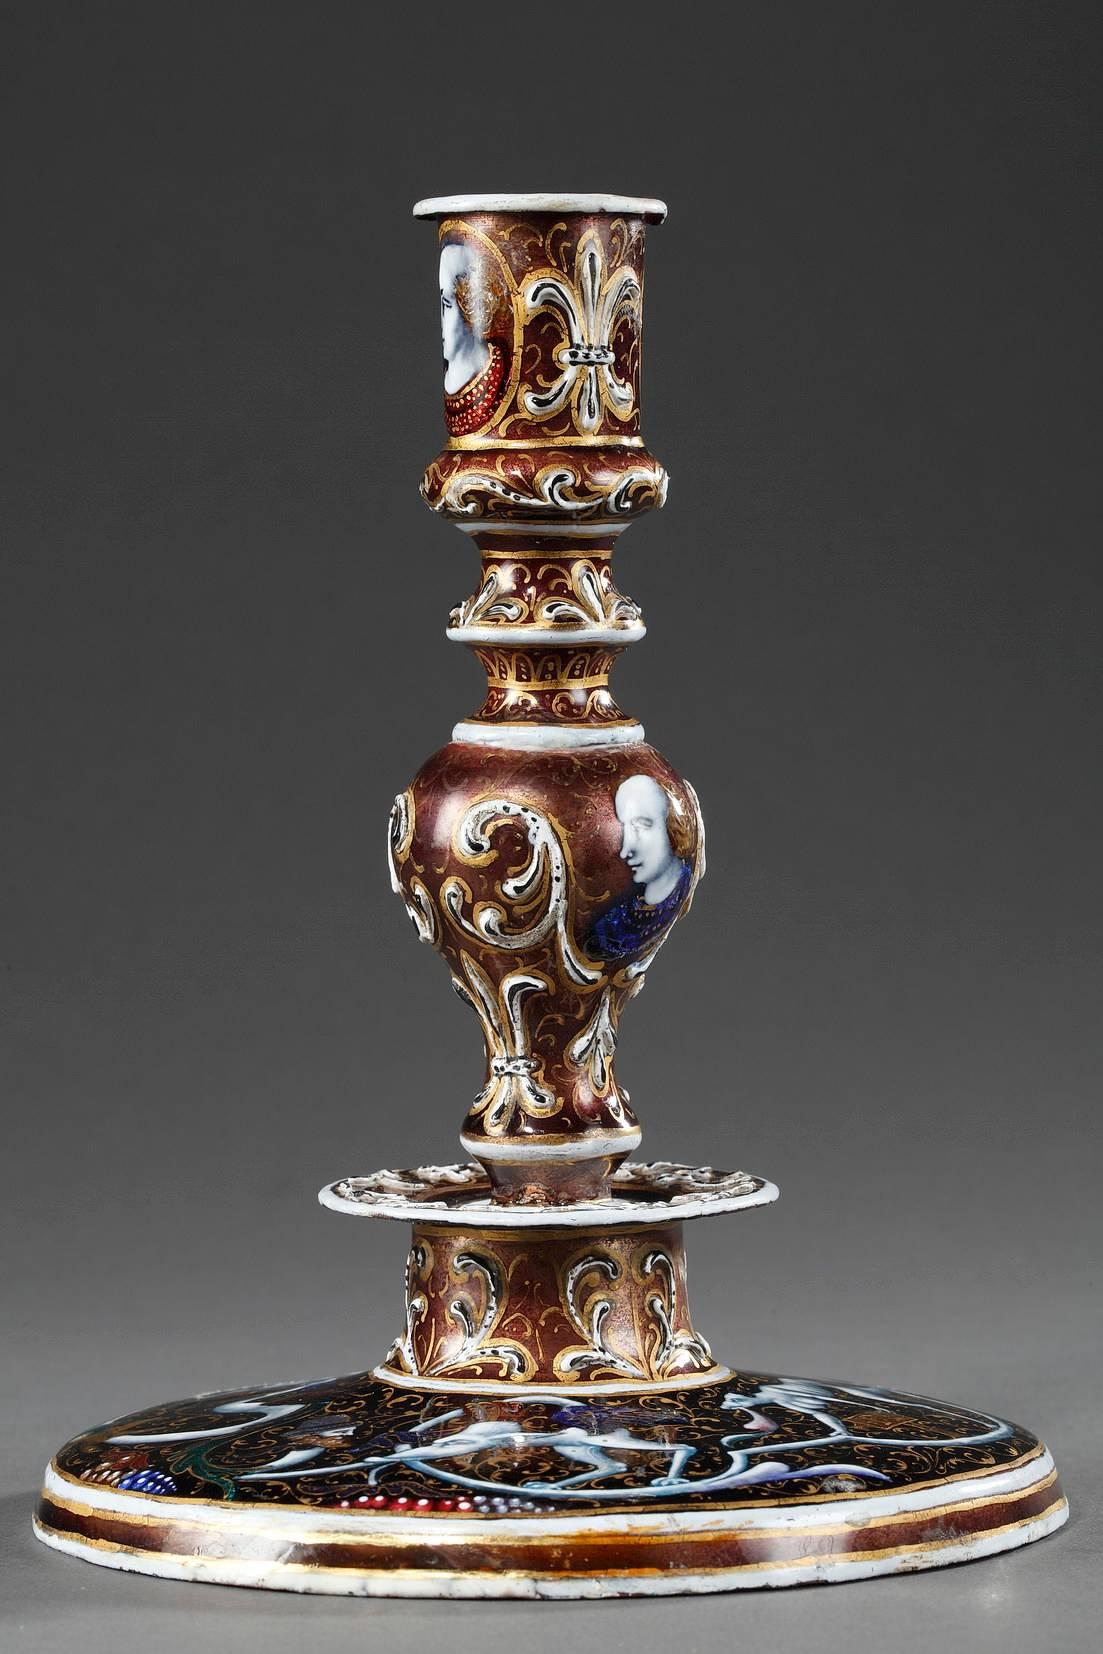 Enamel candlestick from Limoges in Renaissance style, decorated with busts, chimera, and other fantastic creatures. The dark brown background is decorated with grotesque motifs featuring half-animals, half-humans, and masks. Gilded rinceau and